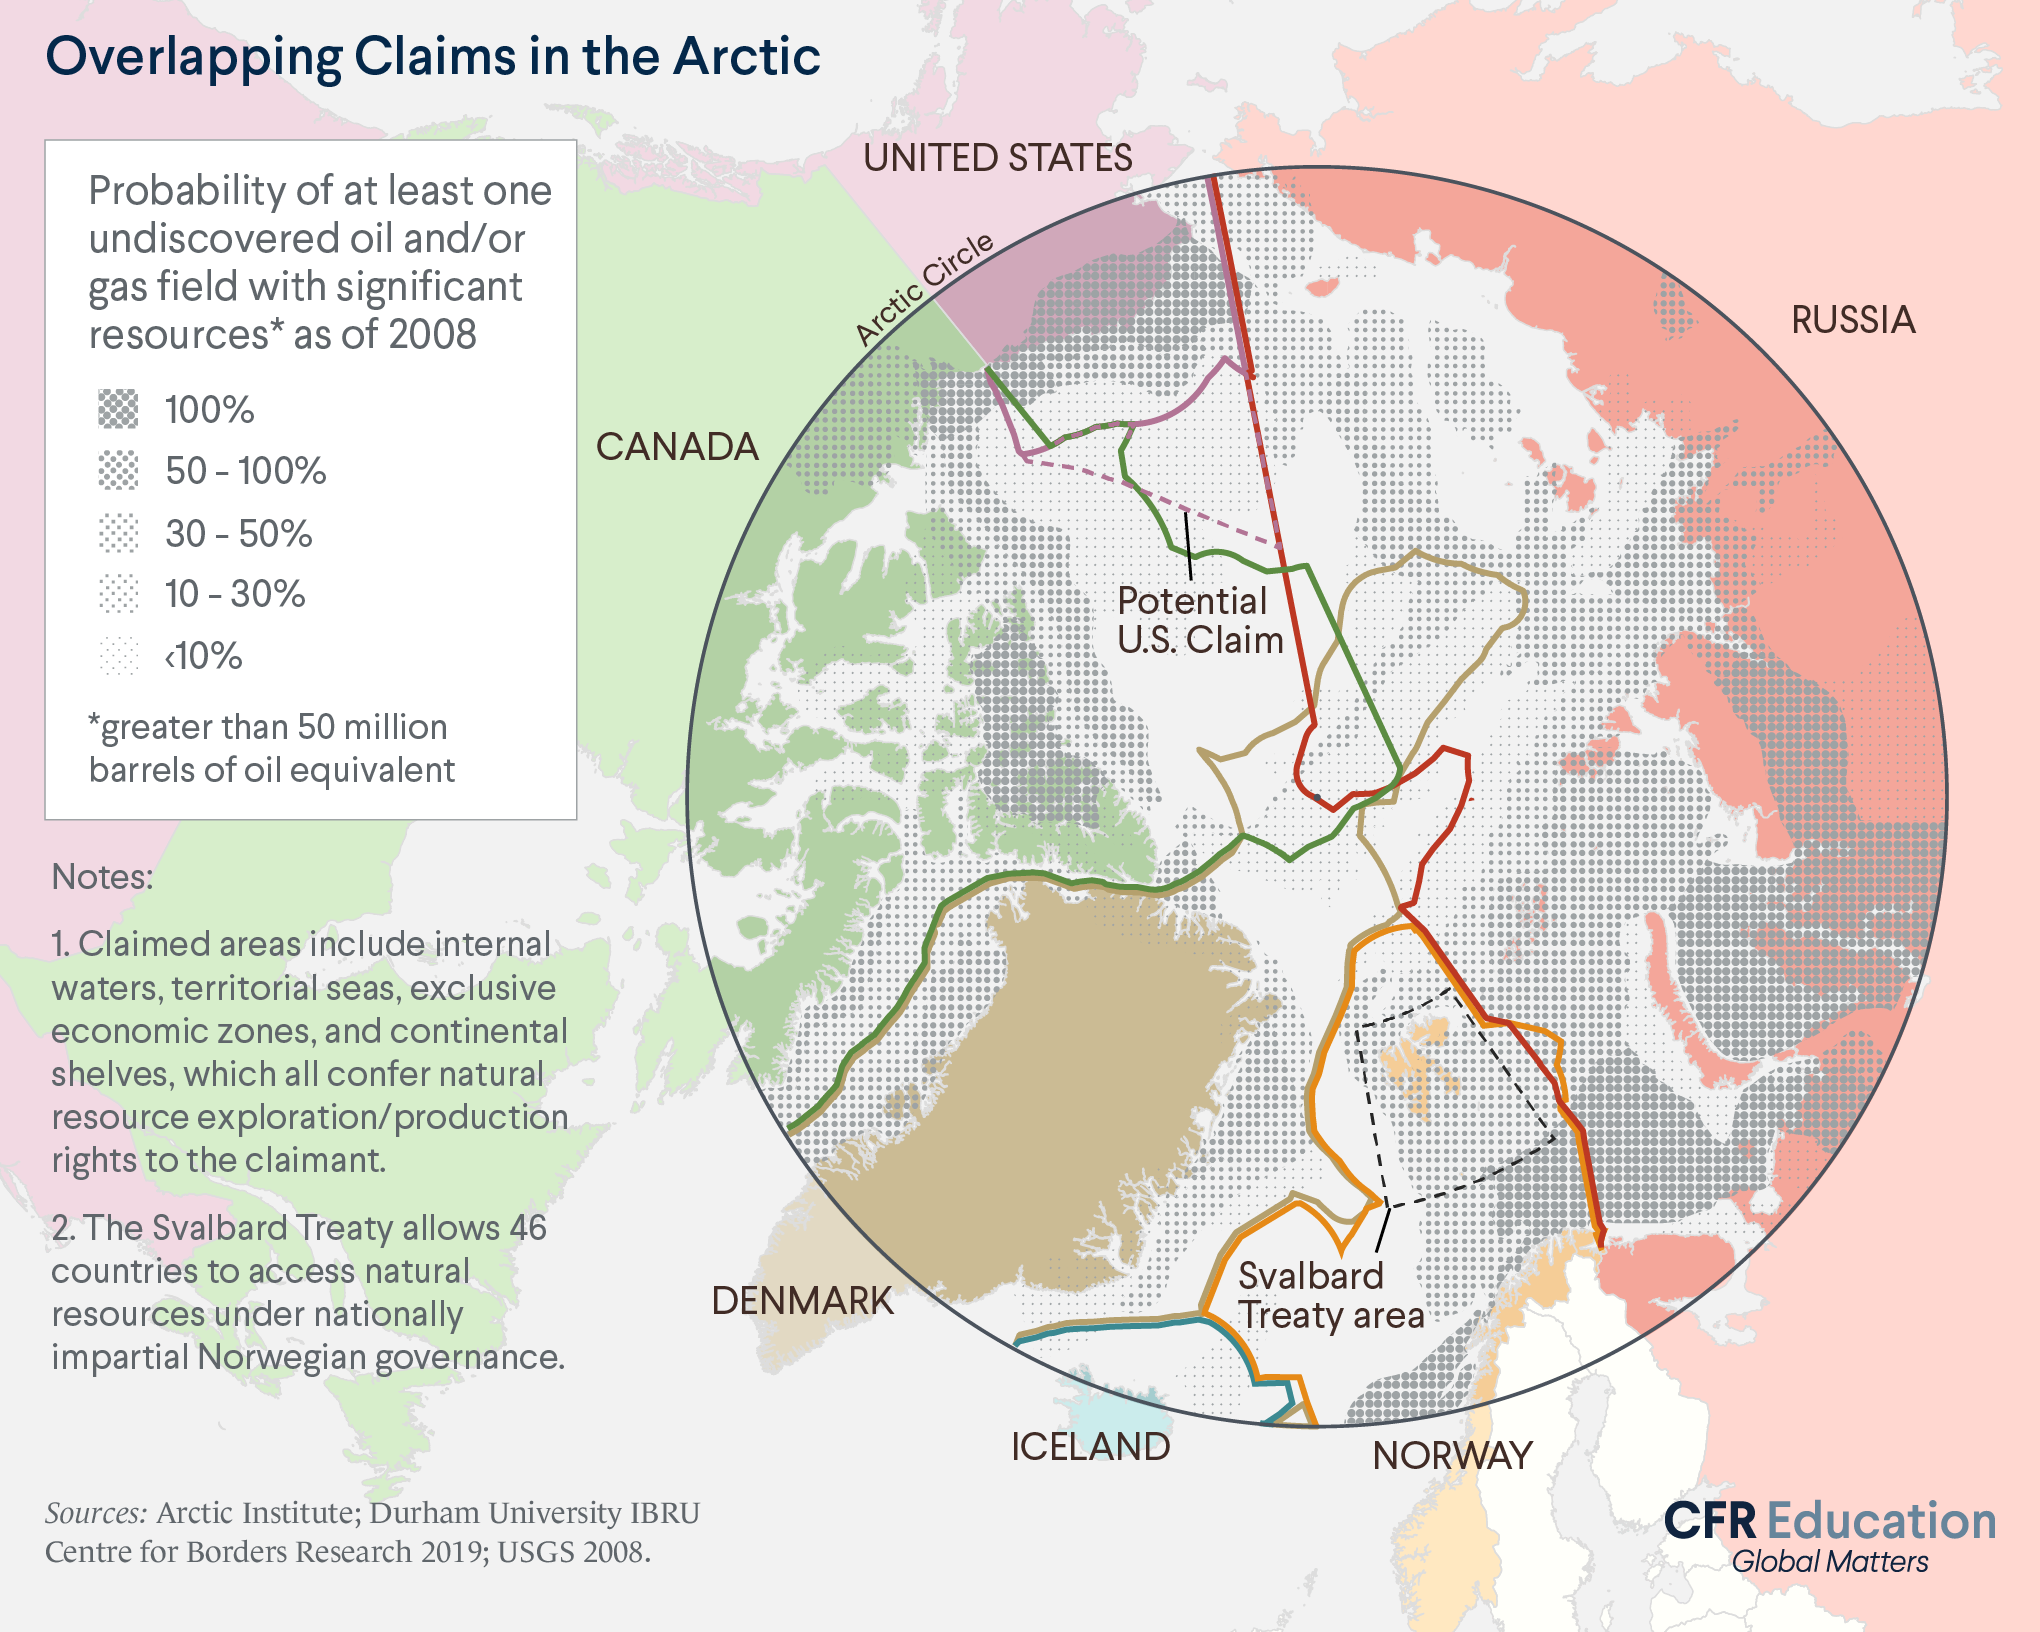 Map shows the overlapping claims in the Arctic and the probability of at least one undiscovered oil and/or gas field with significant resources being in these areas as of 2008. For more info contact us at cfr_education@cfr.org.